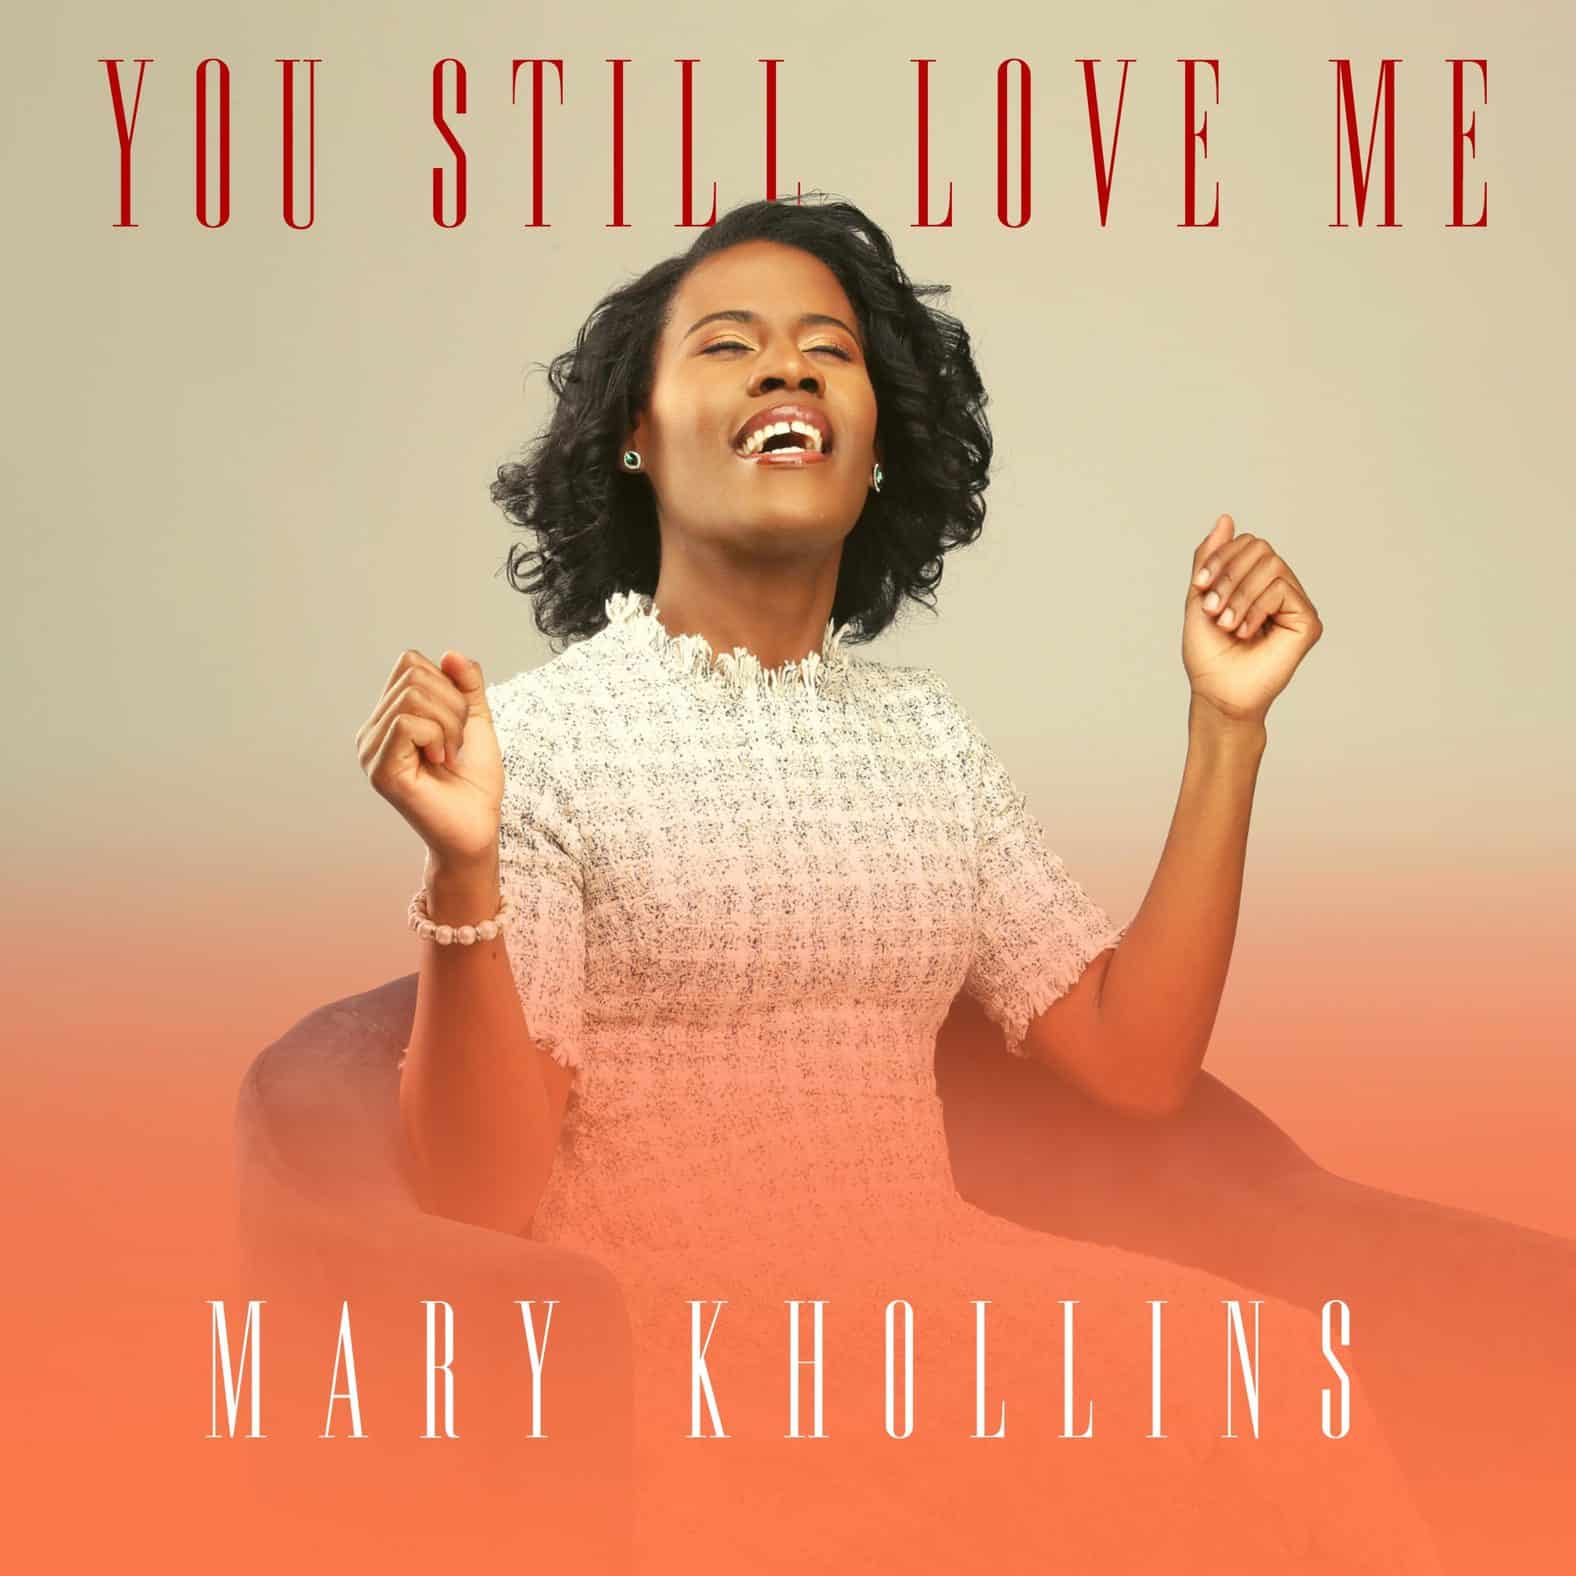 Download Mp3: Mary Khollins - You Still Love Me